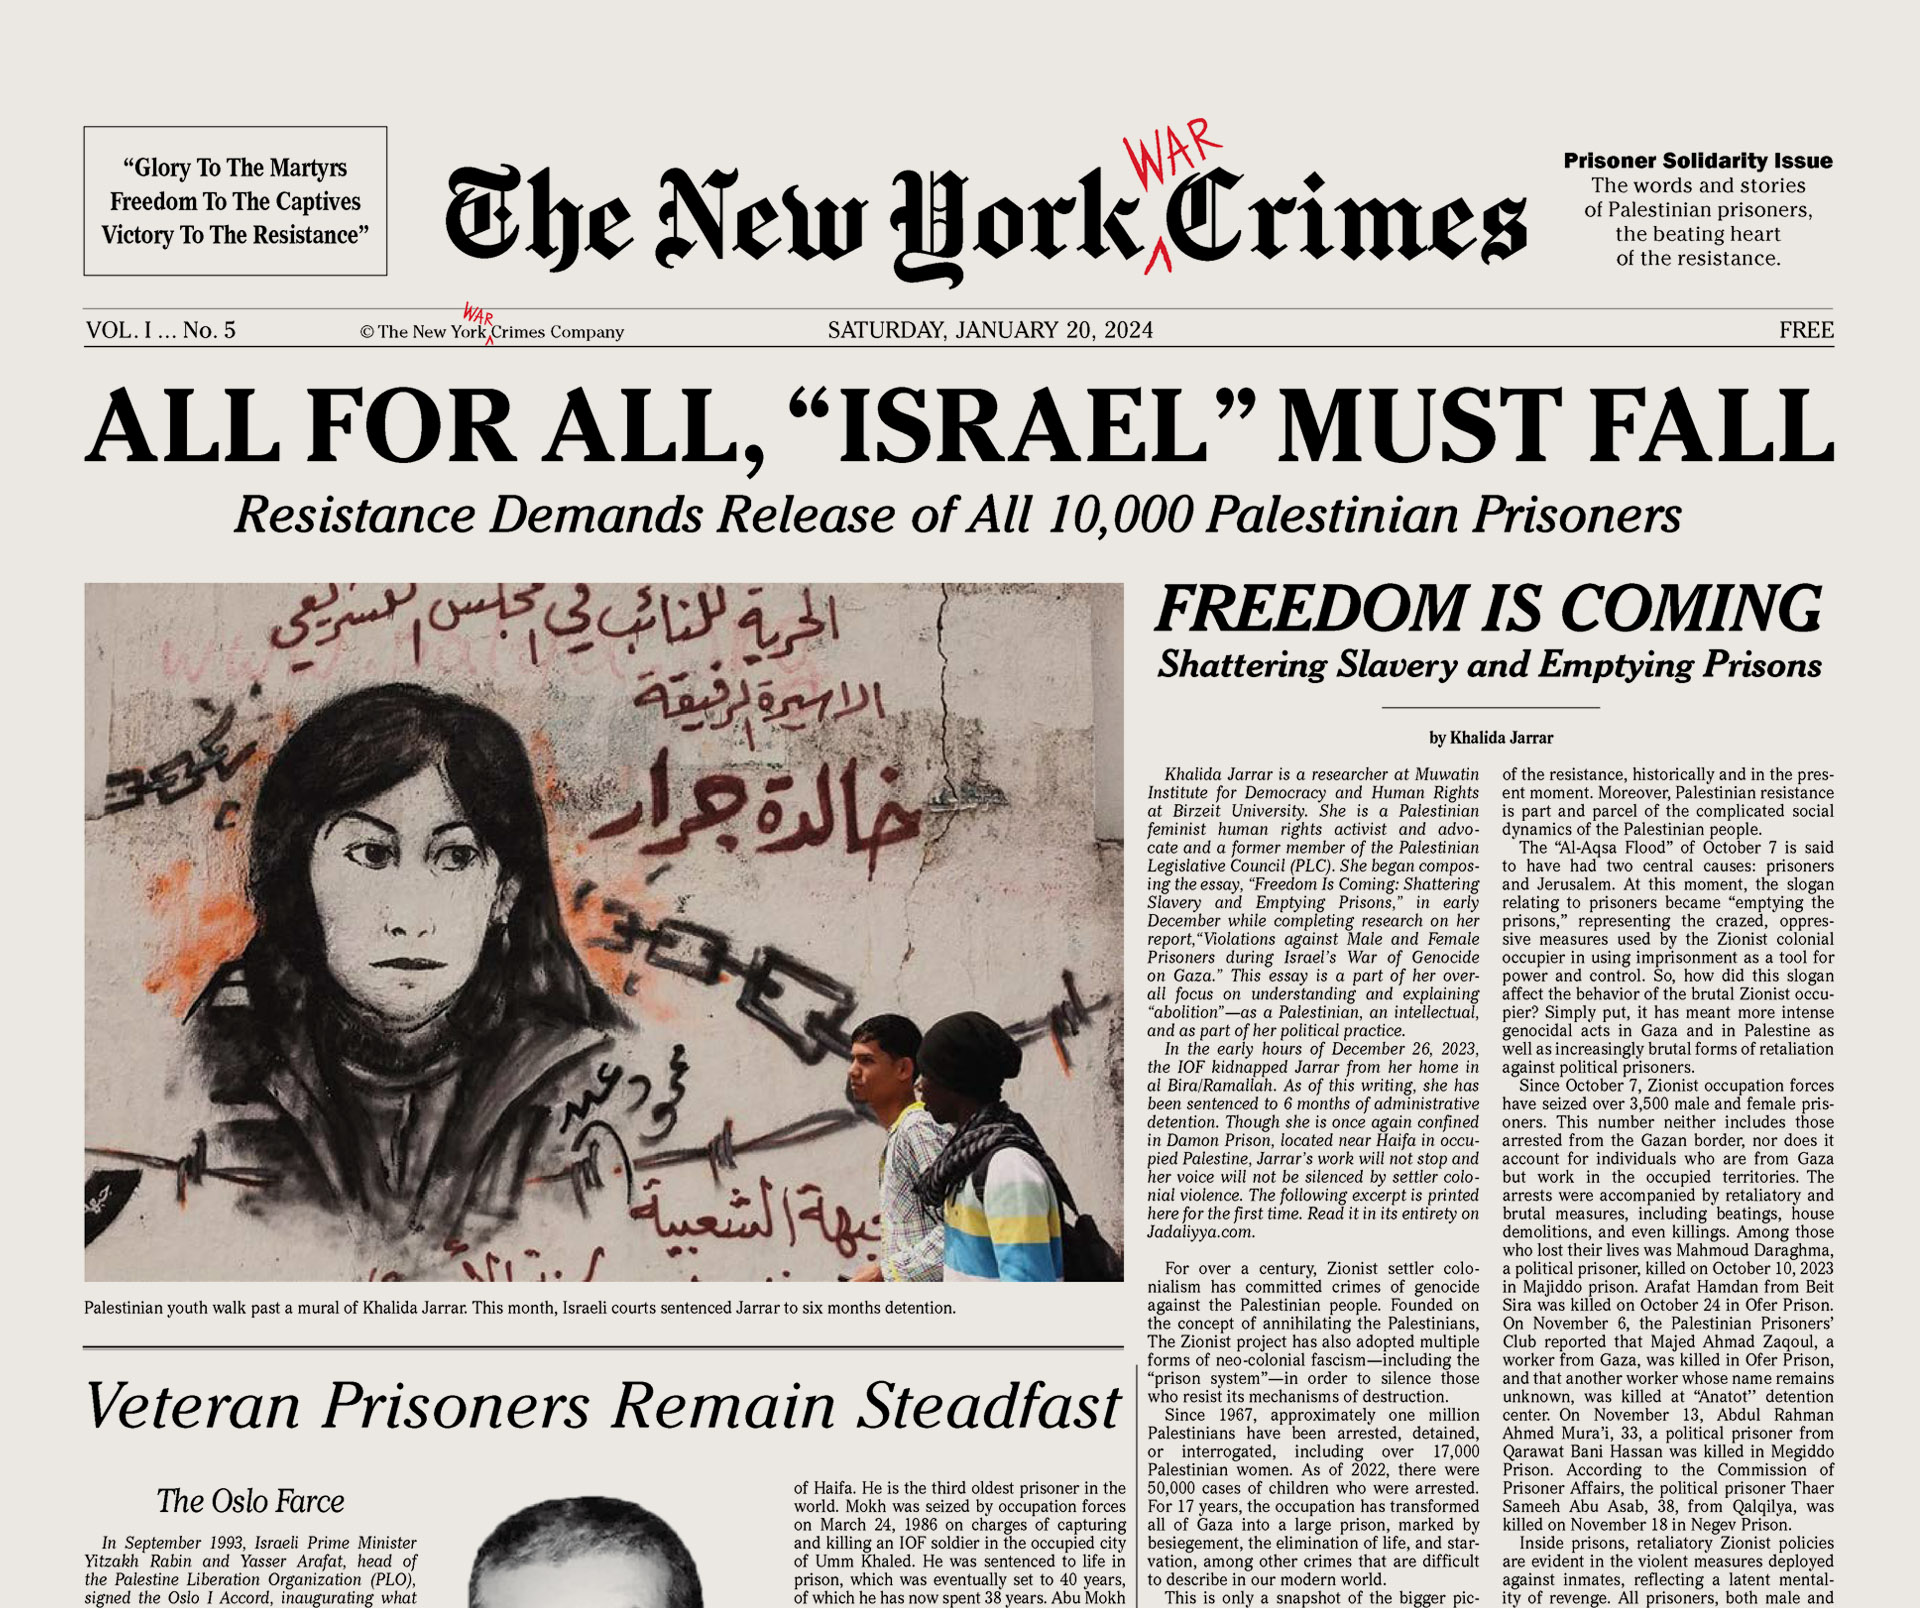 https://newyorkwarcrimes.com/media/pages/print-issue-vol-i-no-5-all-for-all-israel-must-fall/fbbbe3d0ab-1709308545/ny-crimes-05-cover.jpg